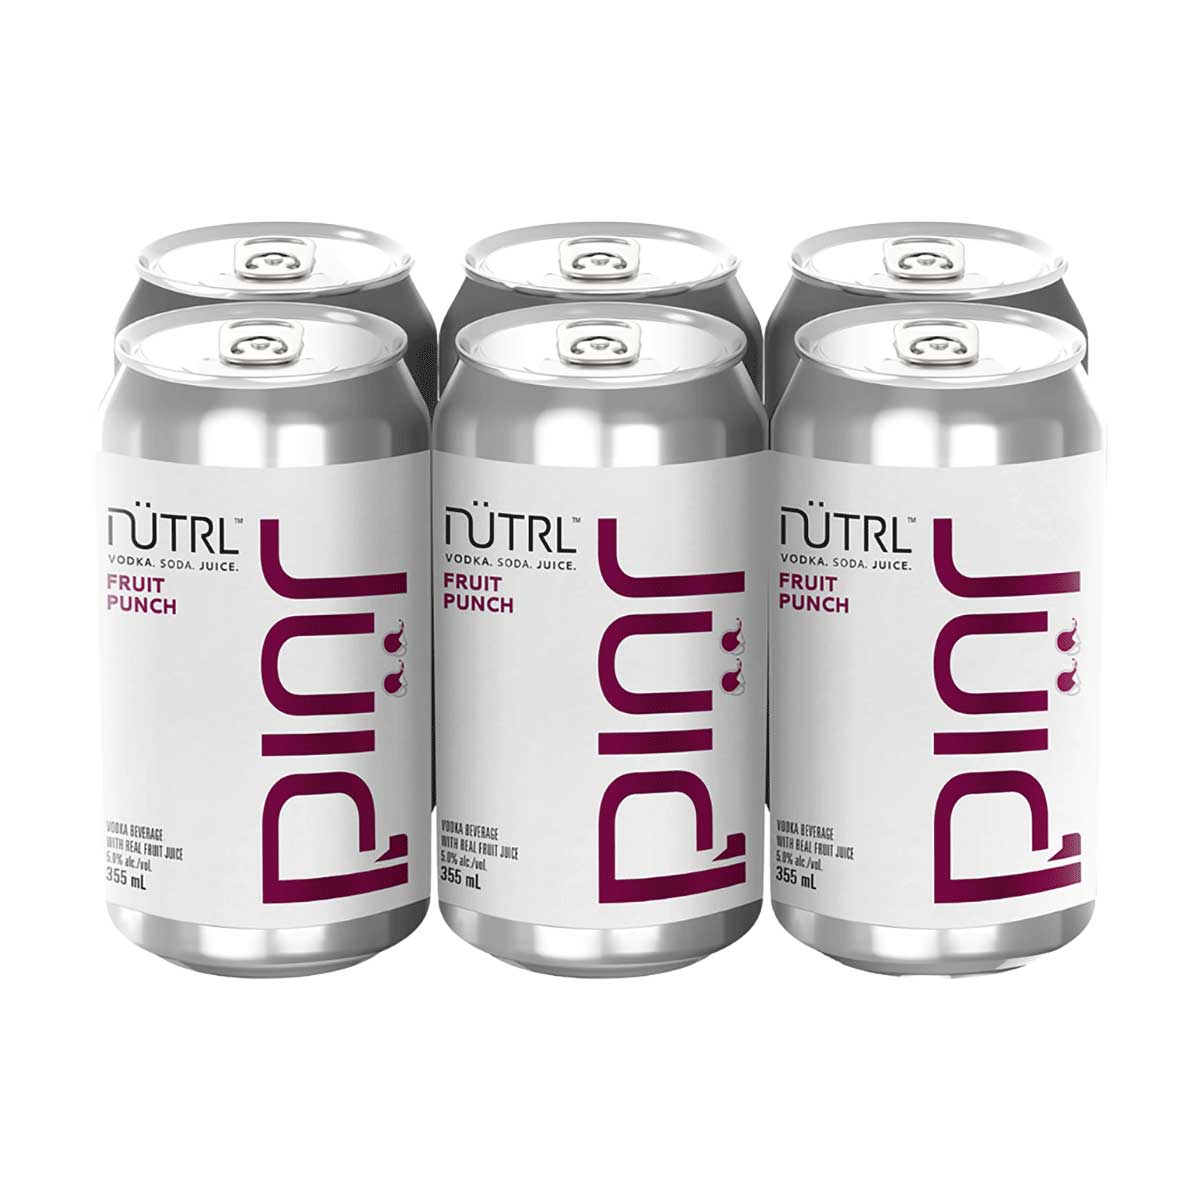 TAG Liquor Stores BC-NUTRL JUICD FRUIT PUNCH 6 CANS